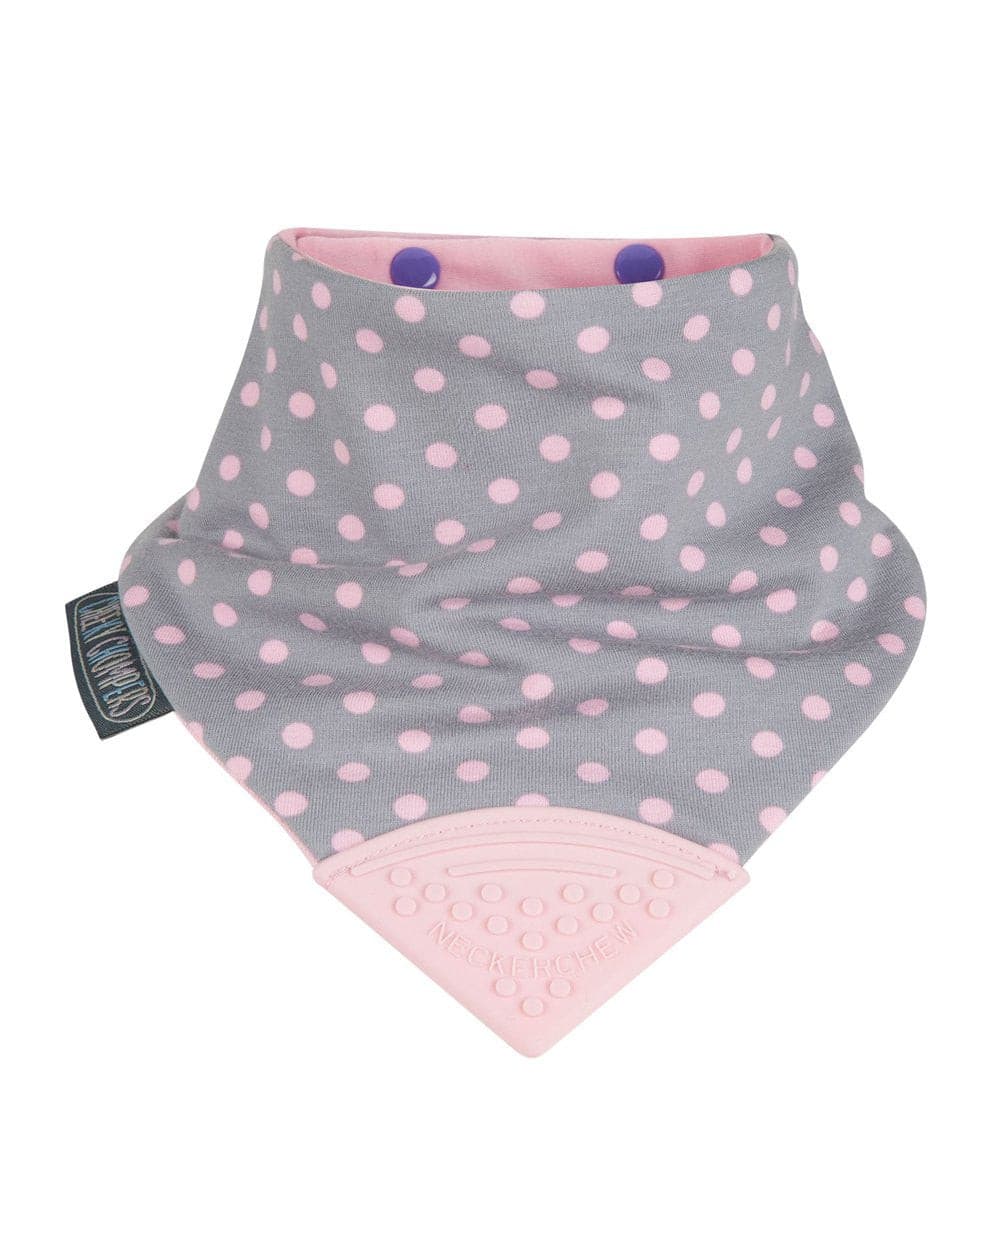 Cheeky Chompers Dribble Bandana Bibs with Teether Attached with teether Super absorbent - 3 layers Hygienic  2 bibs in one Plain layers: 100% cotton Suitable for 2 months - 2 years pink dots